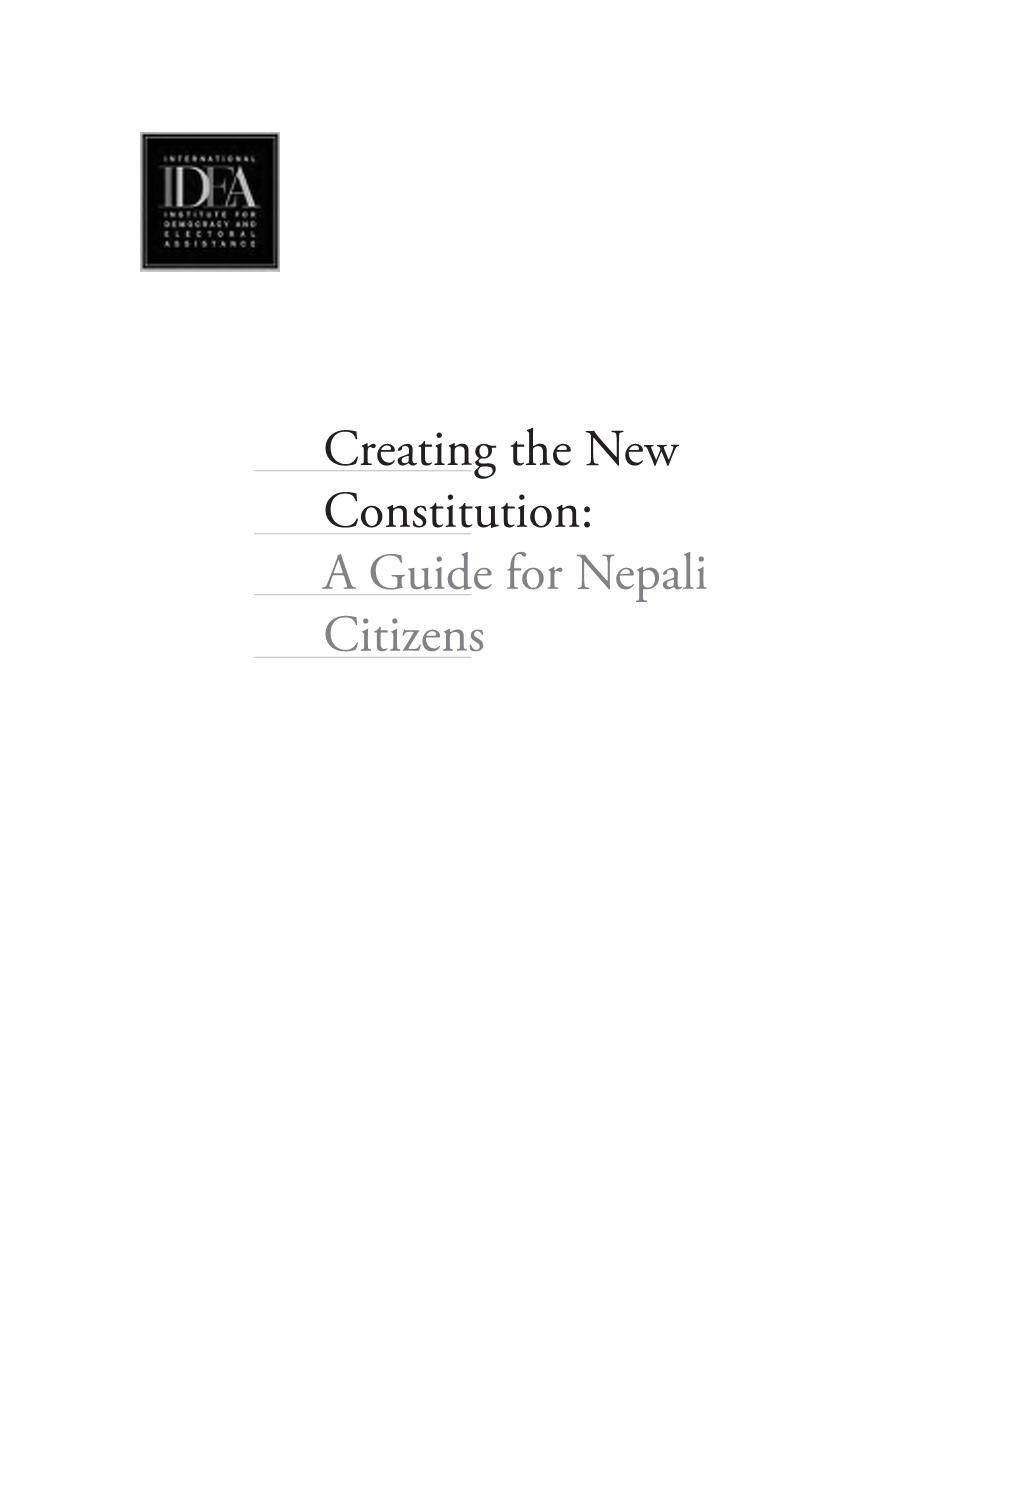 Creating the New Constitution: a Guide for Nepali Citizens